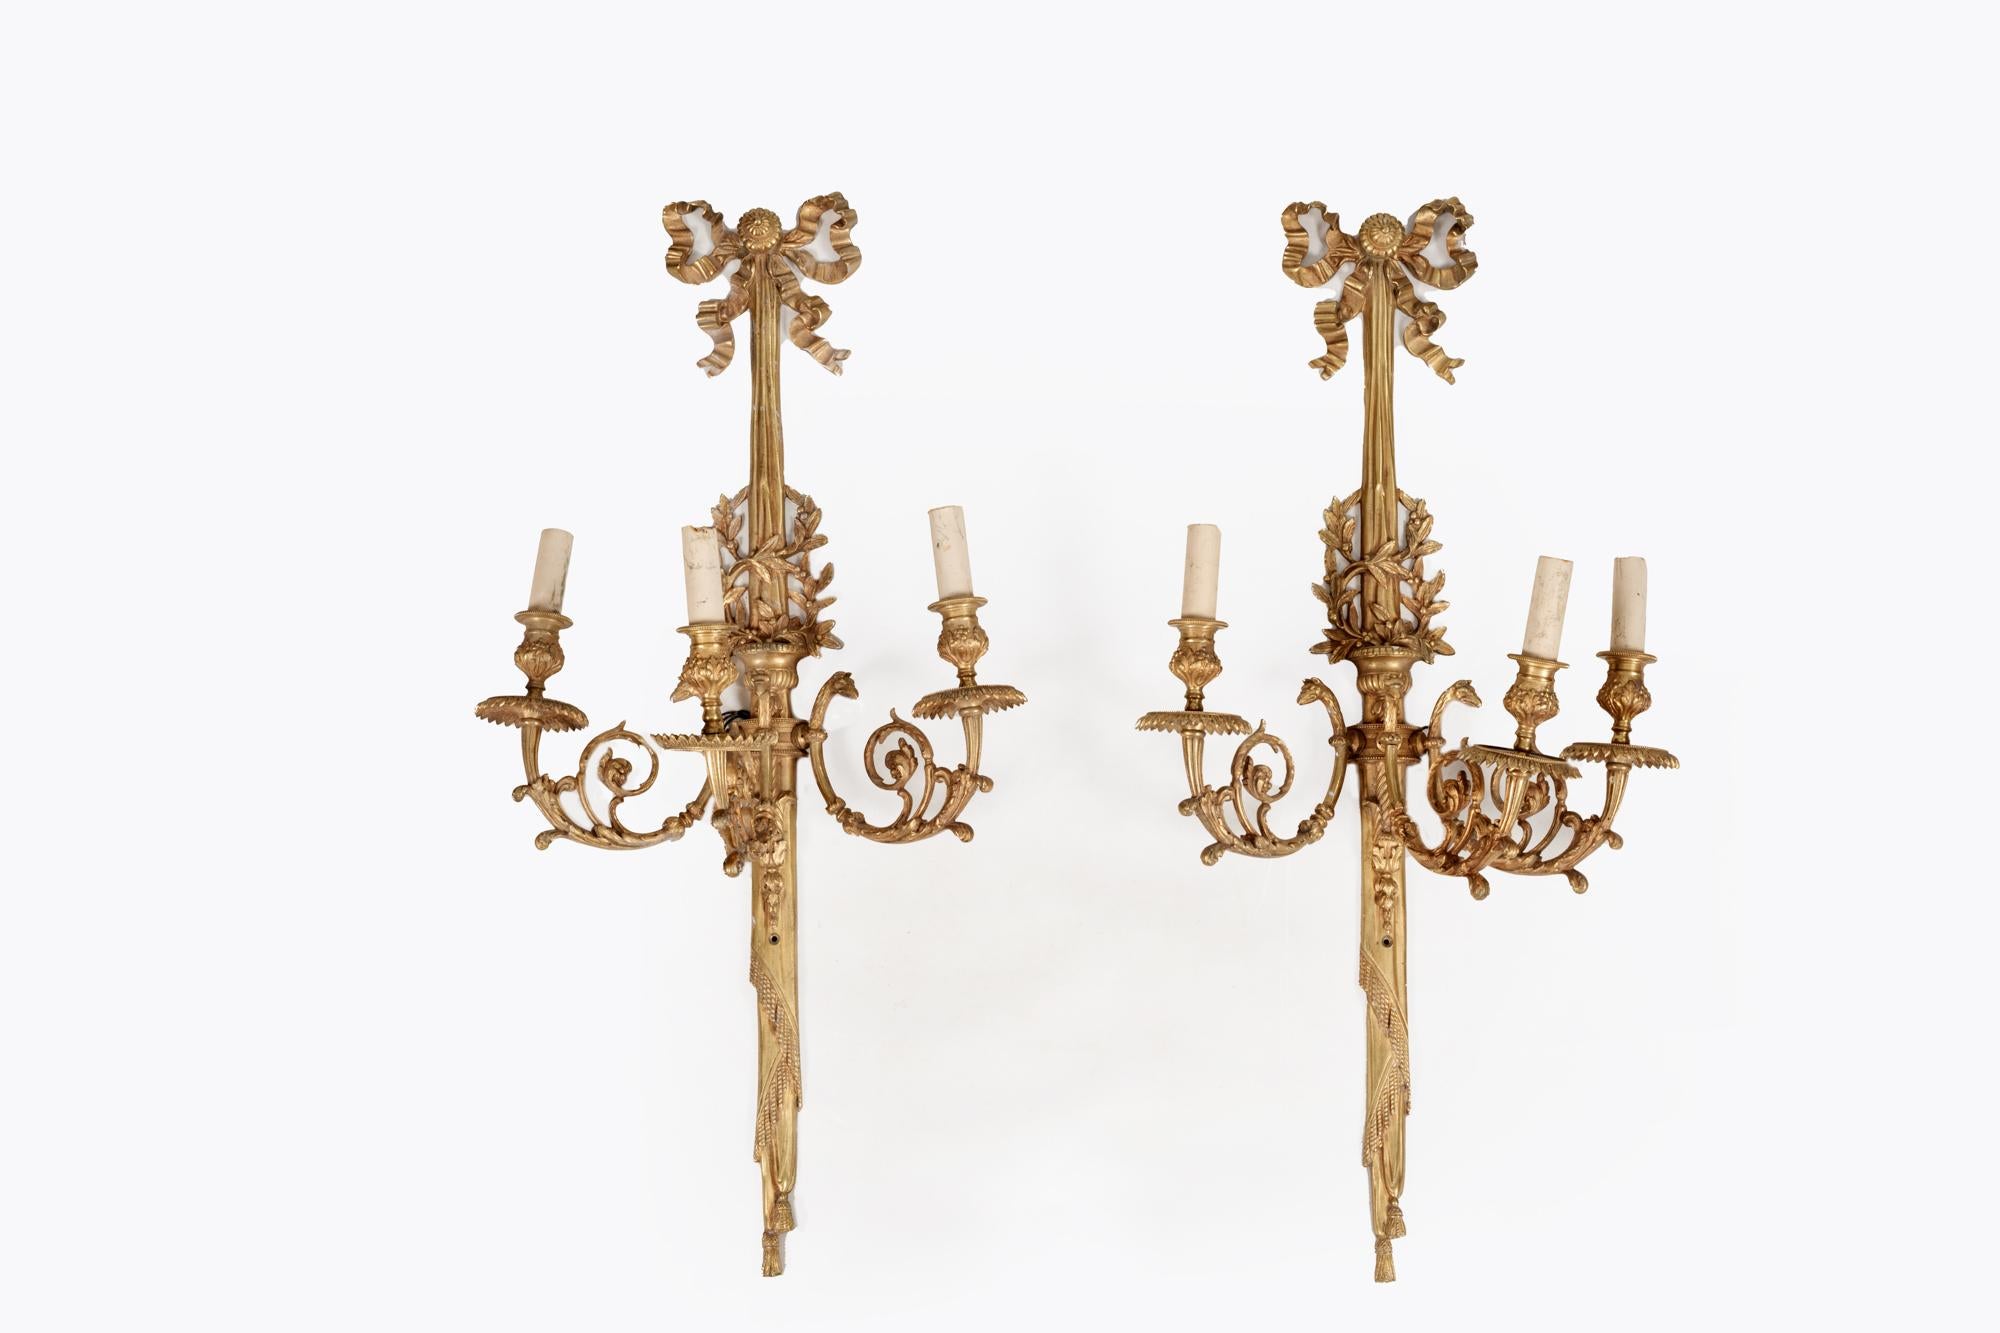 19th Century Regency pair of triple branch gilt metal wall sconces featuring elaborately scrolled candle holder light fittings with acanthus leaf and animal head detailing. The long stems are topped with cast ribbon details, the middle section